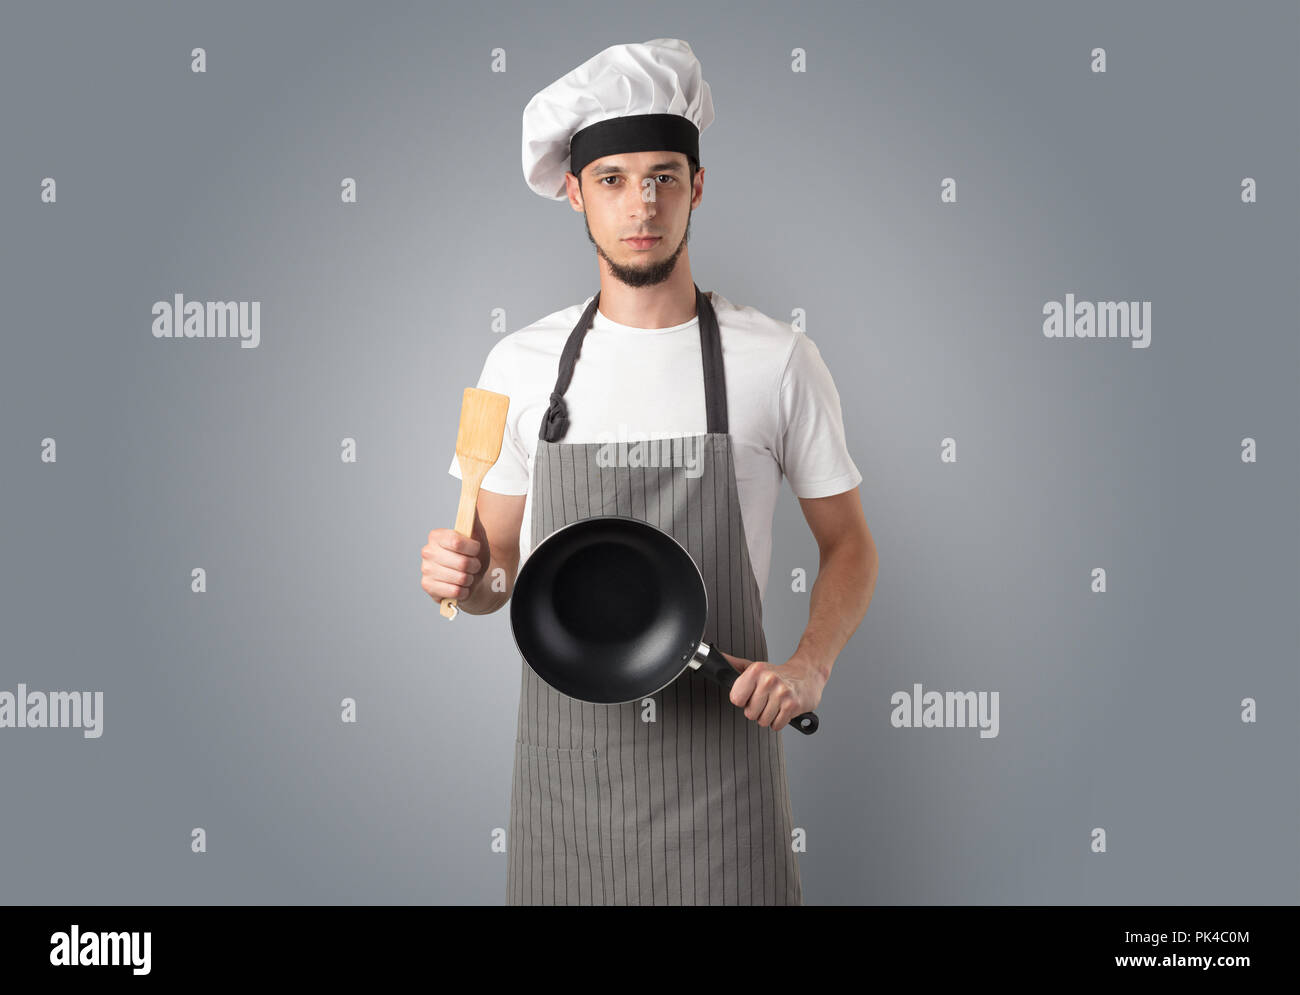 8316 Giant Cook Images, Stock Photos & Vectors